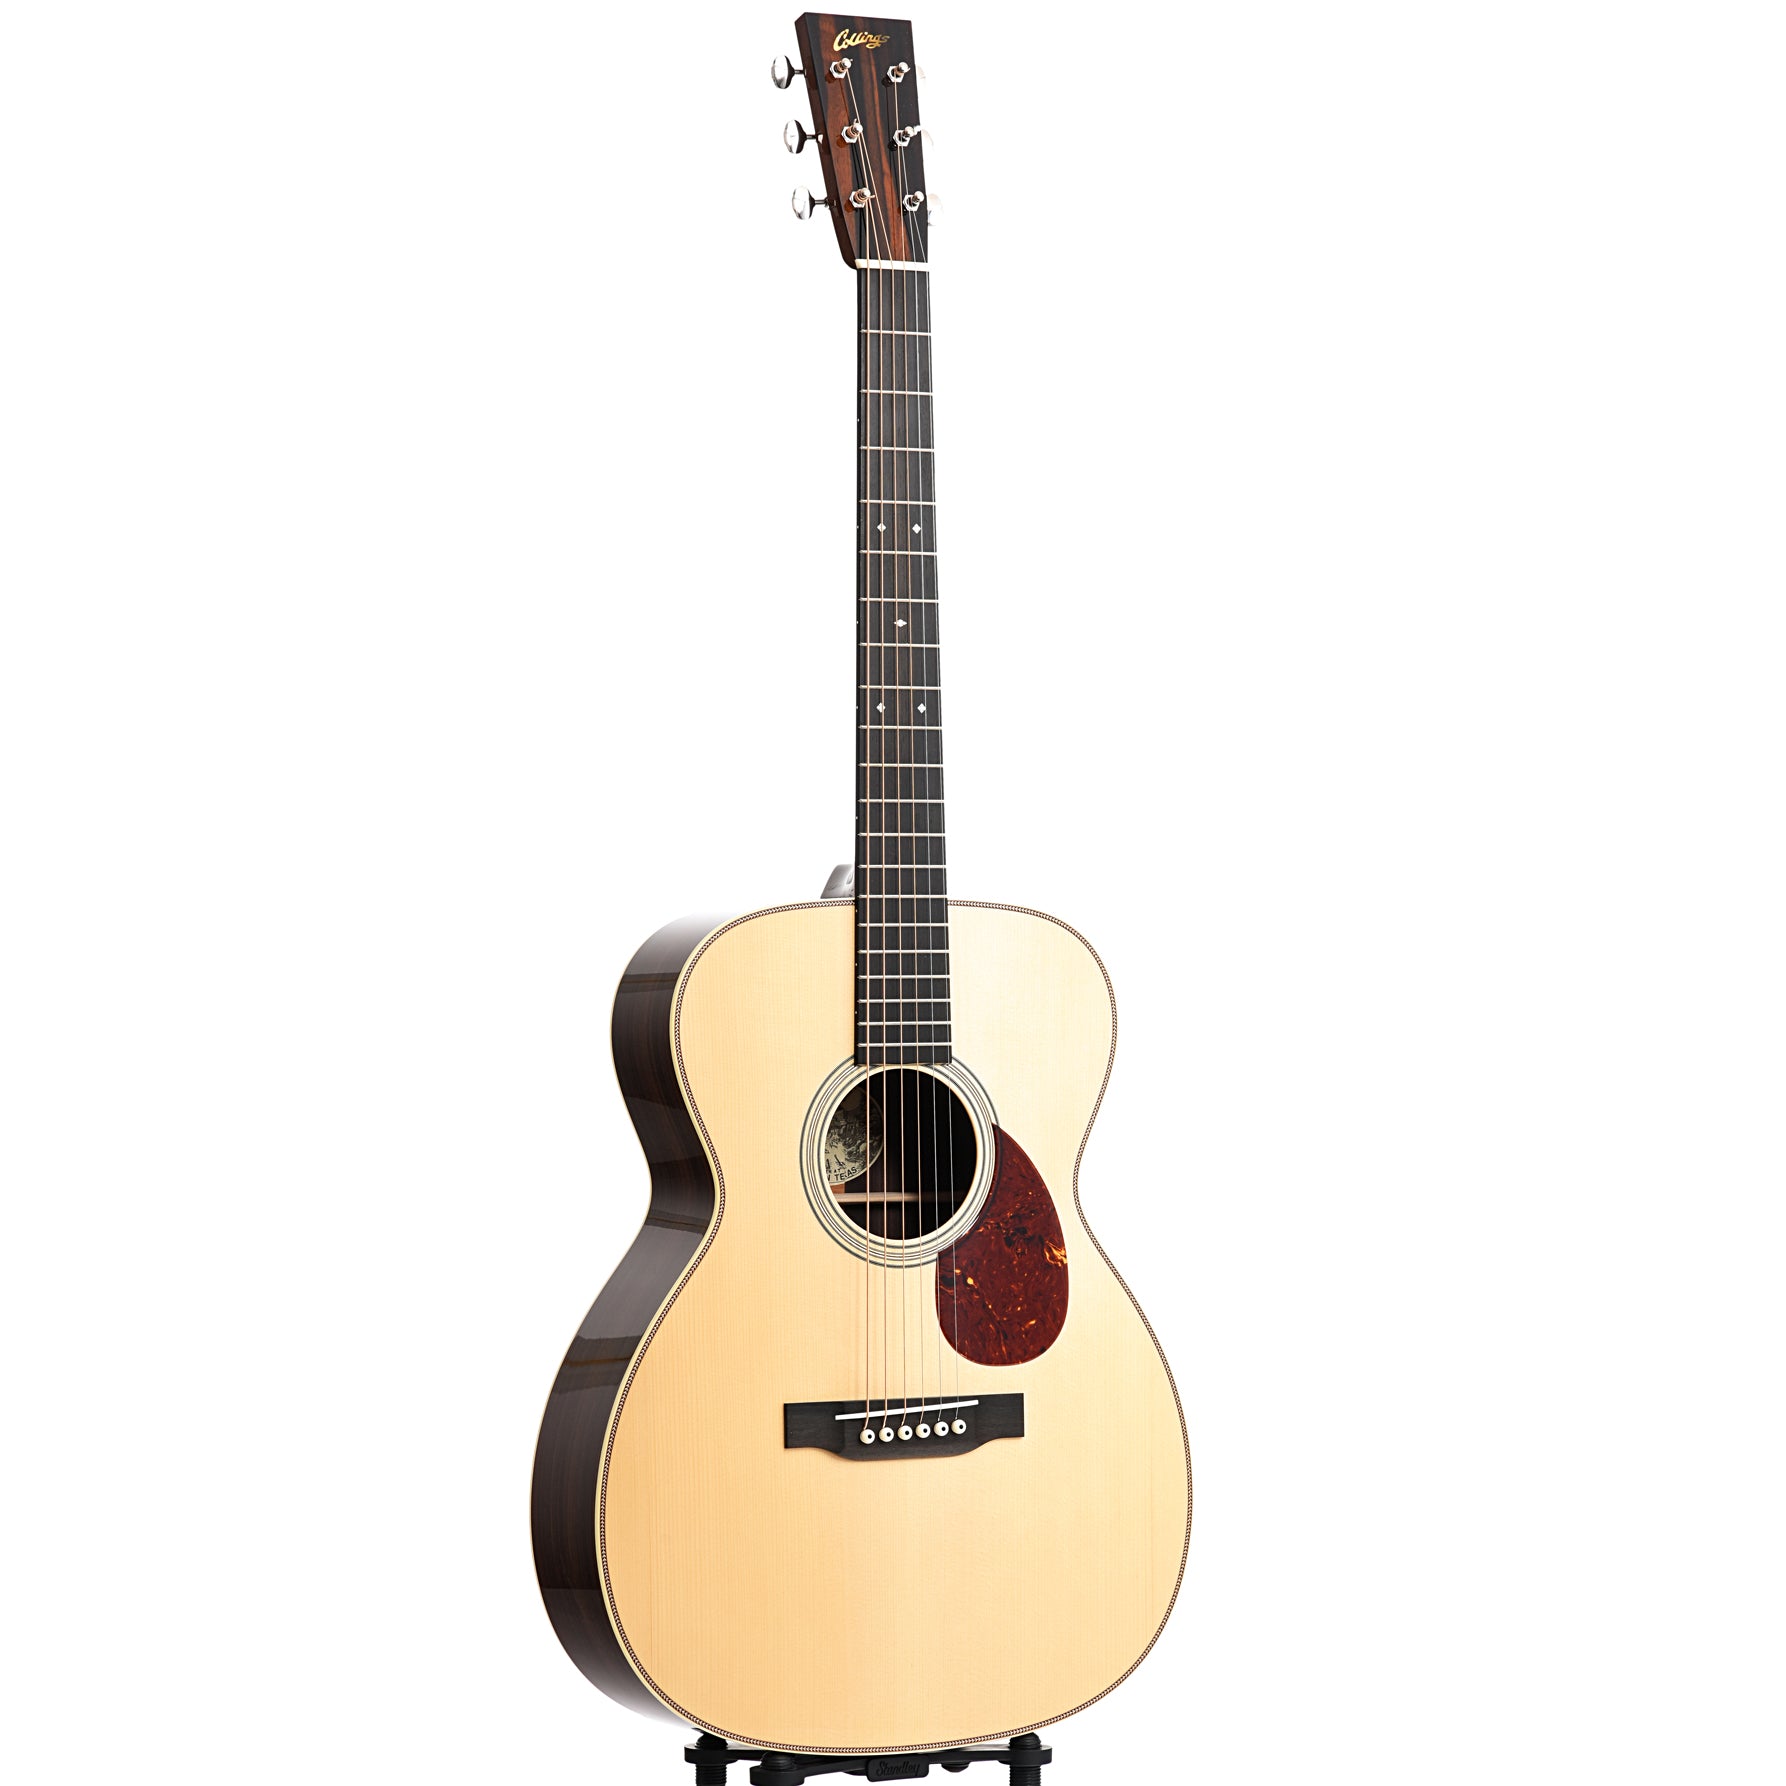 Image 3 of Collings OM2HT Traditional Series Guitar & Case, Adirondack Top - SKU# COLOM2HT-I-A : Product Type Flat-top Guitars : Elderly Instruments